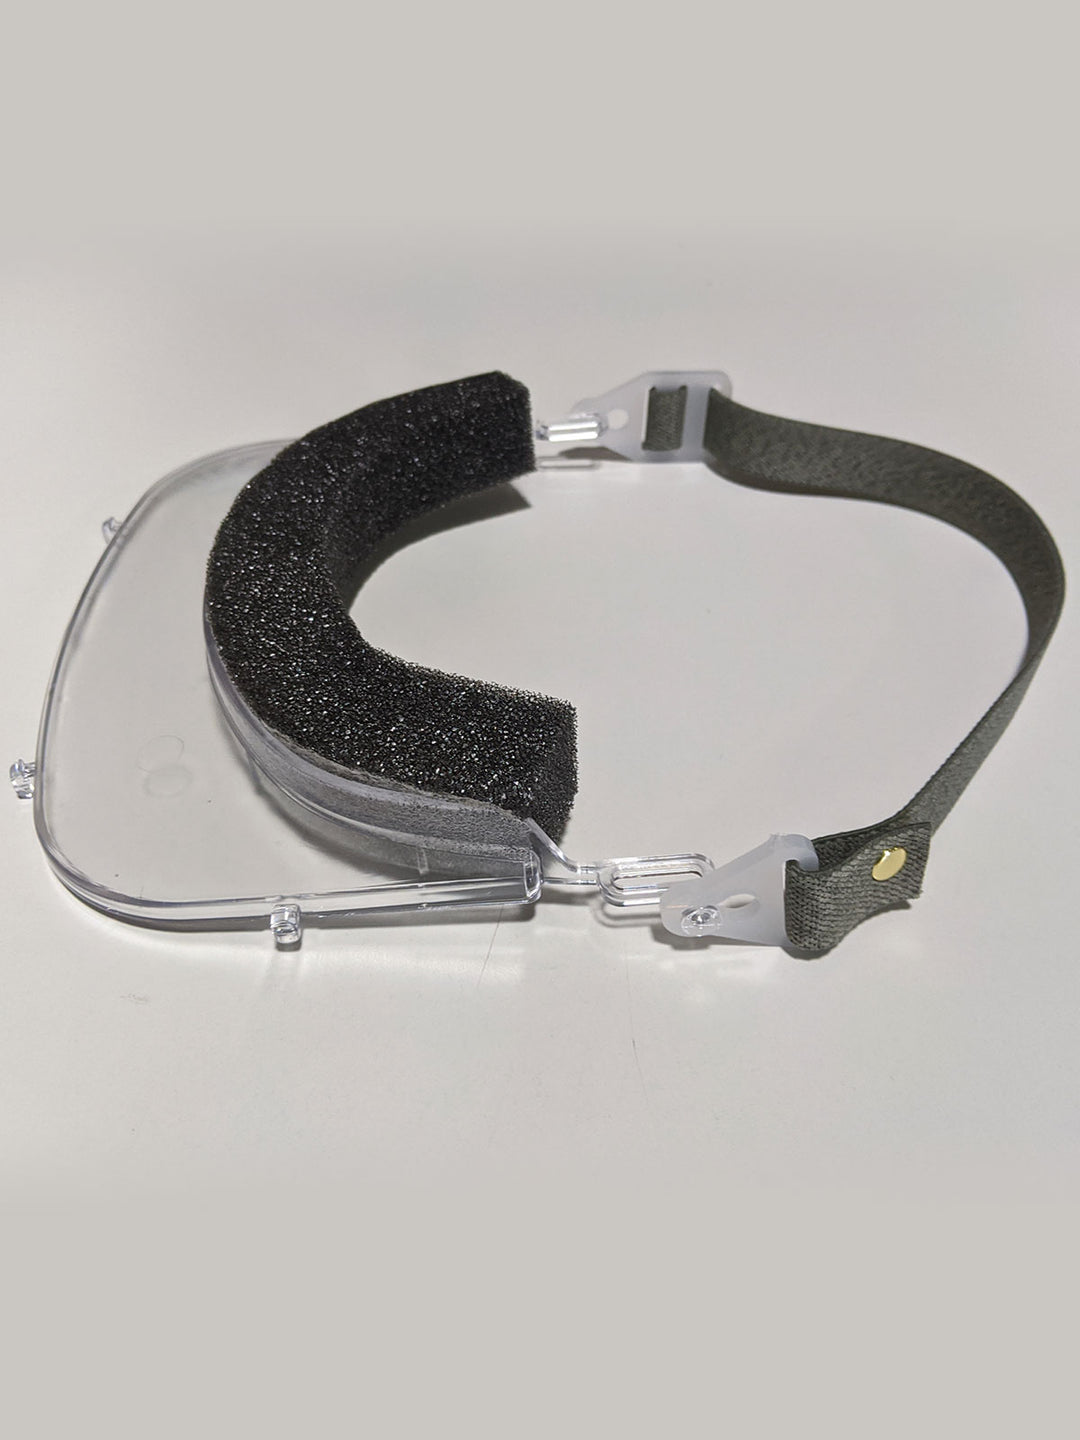 Reusable Face Shield with Replaceable Anti-Fog 6.5 mil Lens